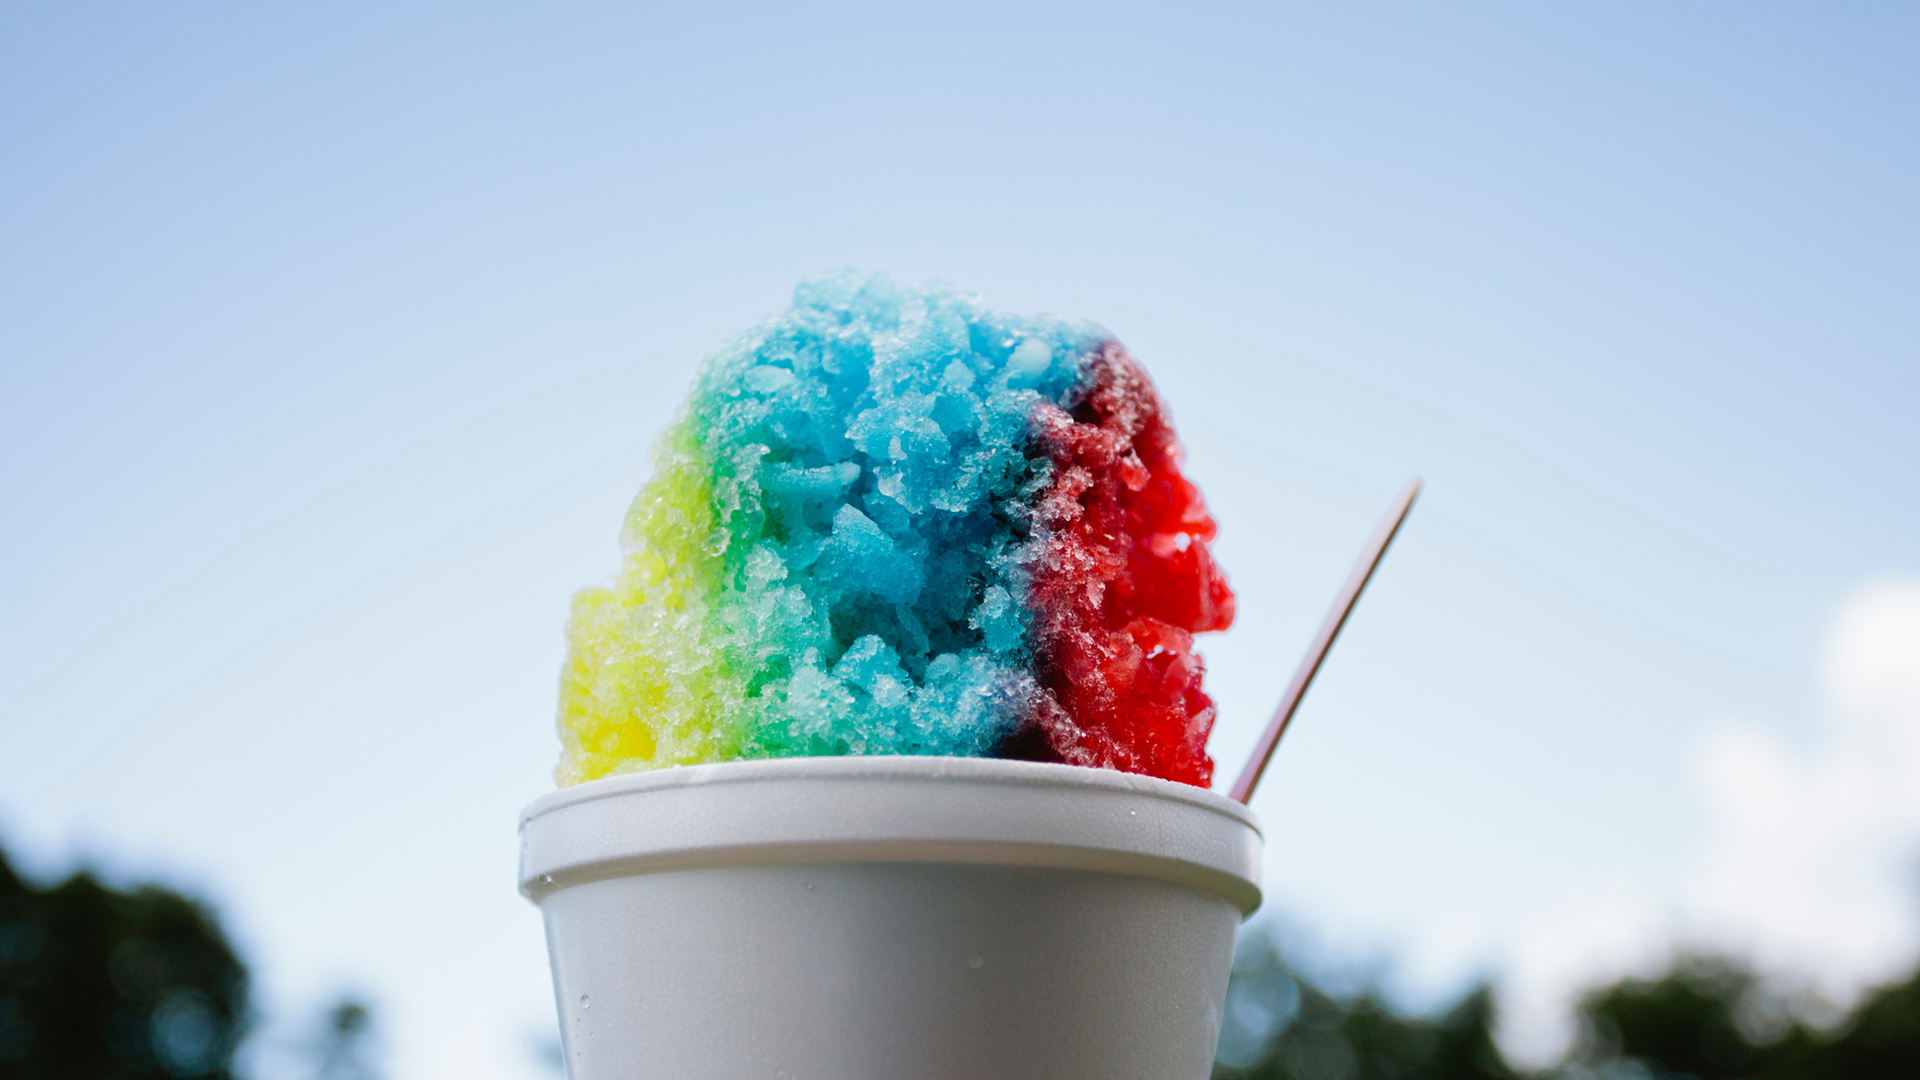 12-Year-Old Mario Mack Started A Shaved Ice Business That Led To Him Buying A Food Truck After Being Inspired By His Mom